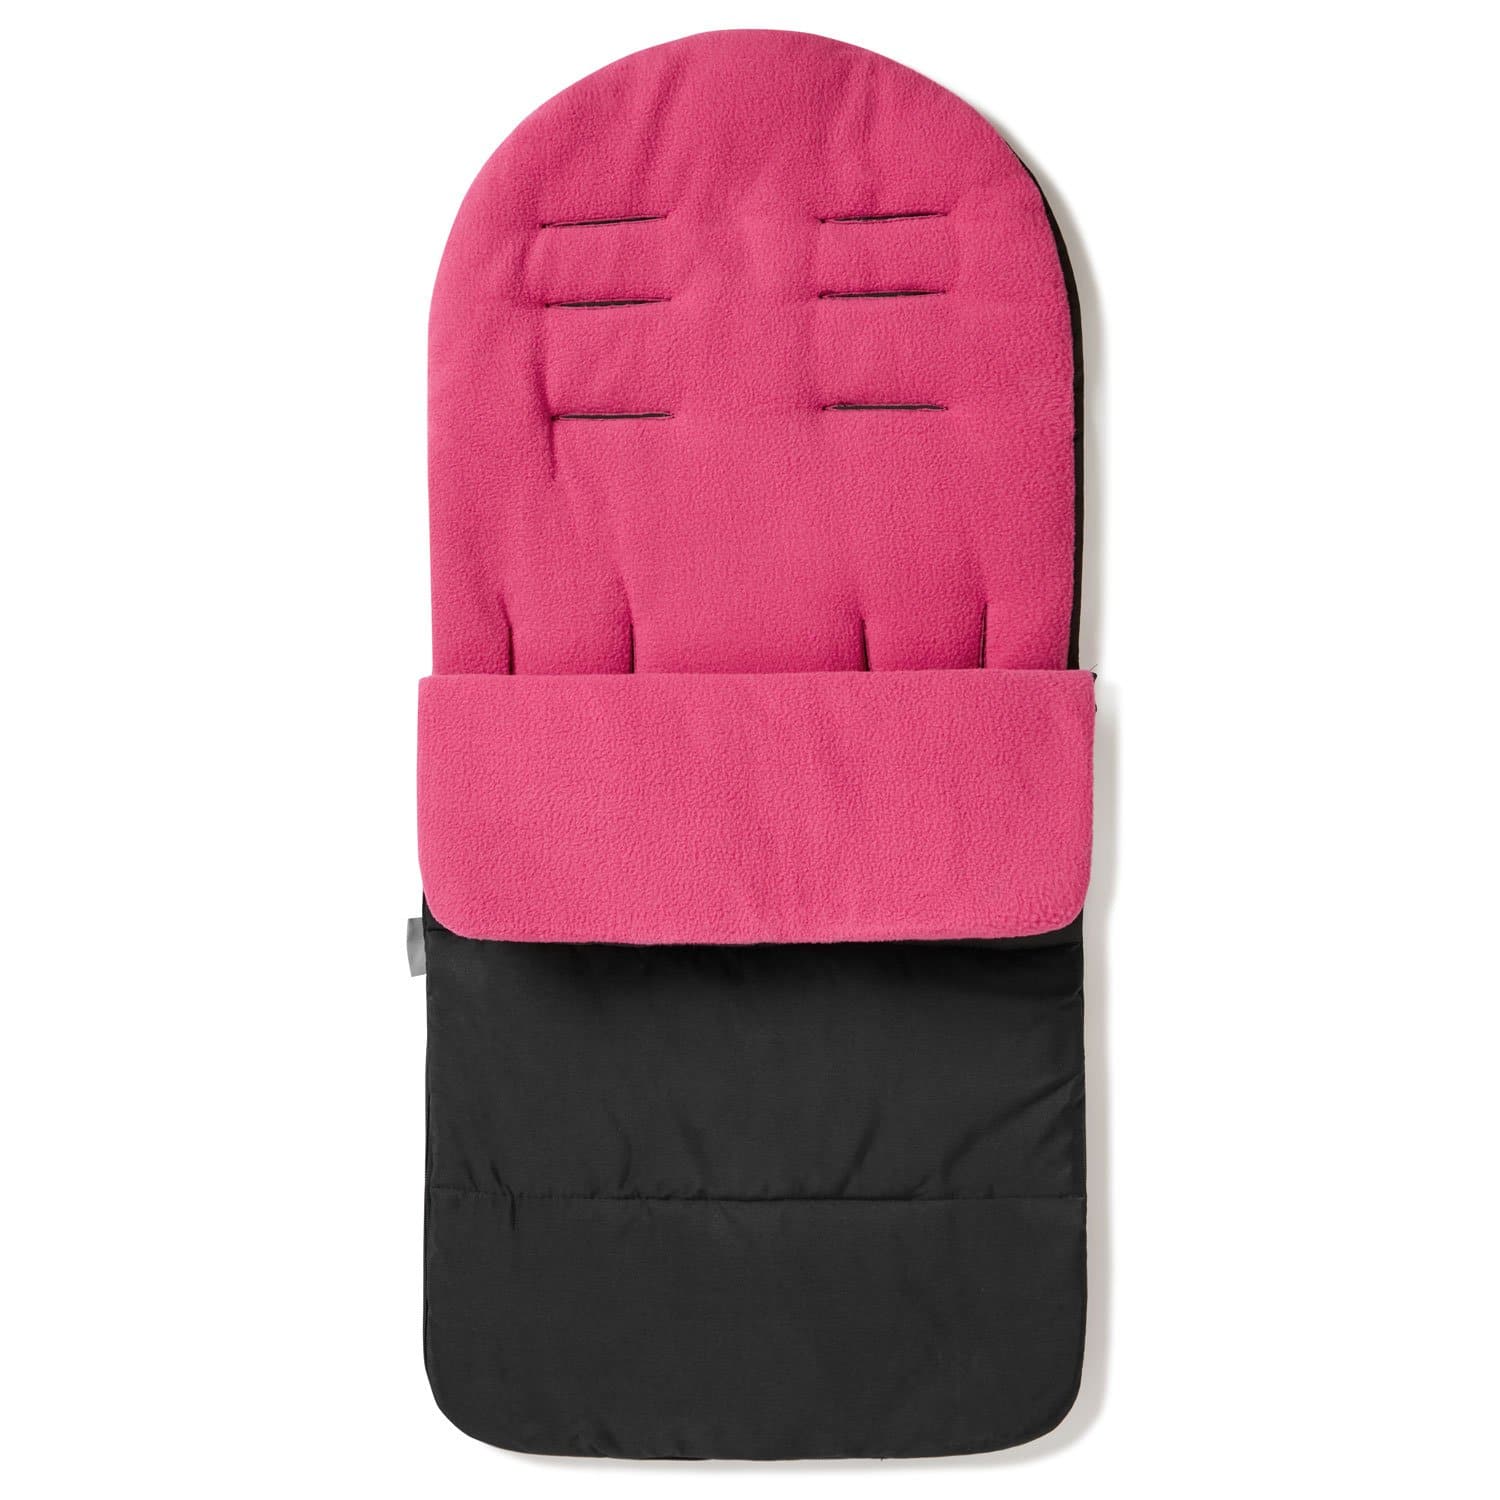 Premium Footmuff / Cosy Toes Compatible with BabyDan - Pink Rose / Fits All Models | For Your Little One